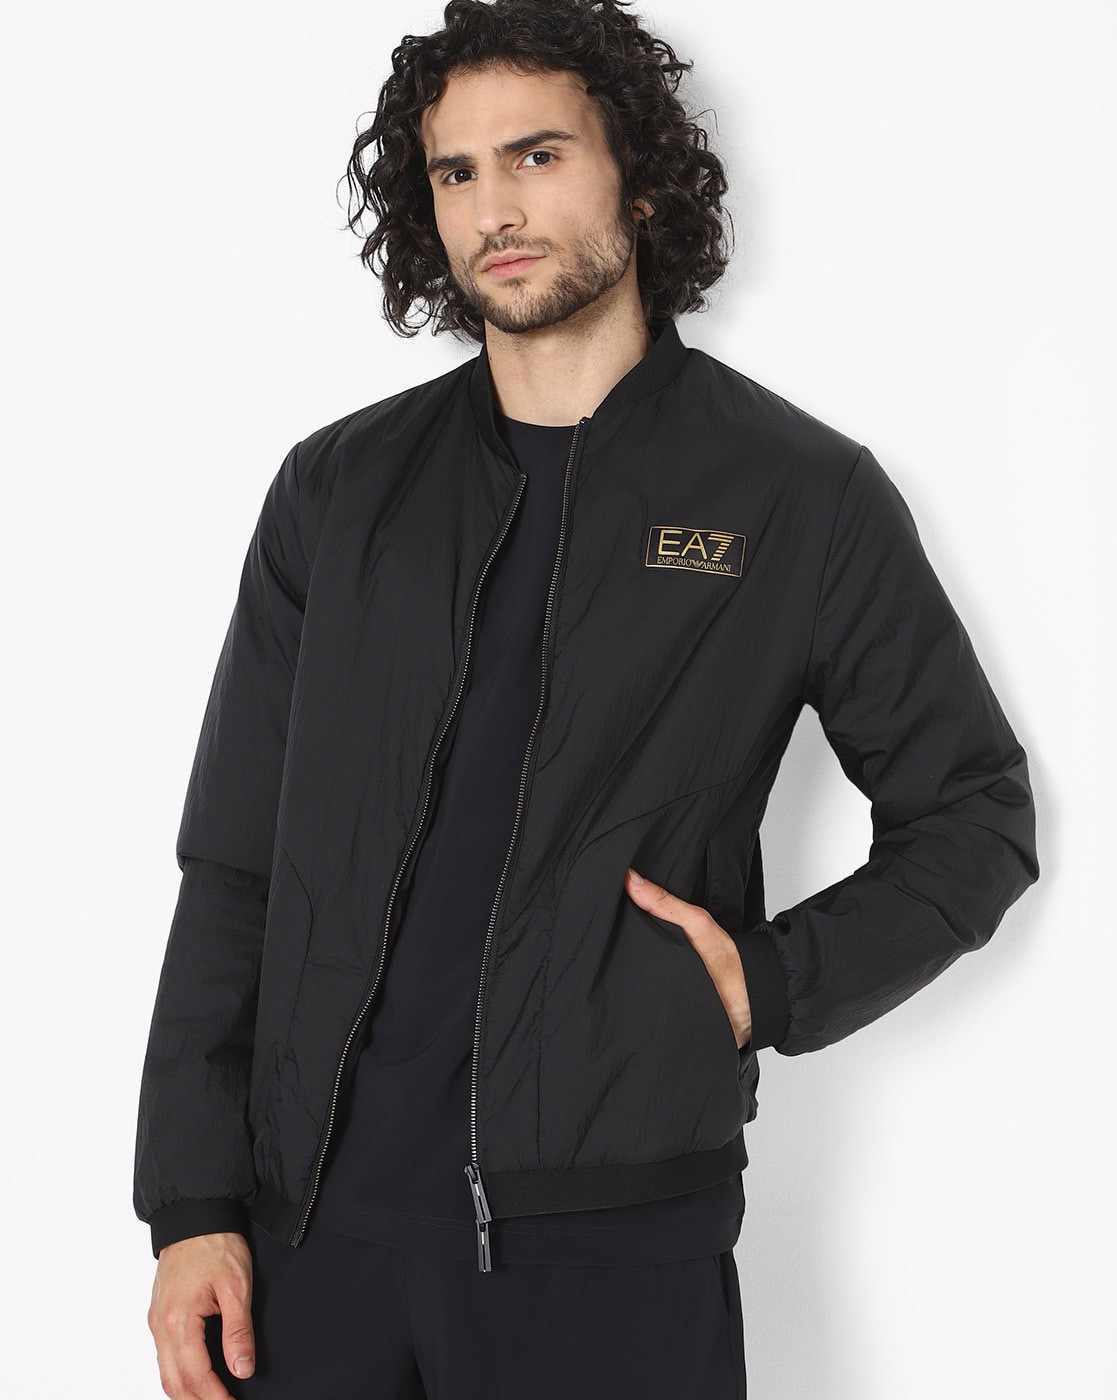 Buy EA7 Emporio Armani Gold Label Bomber Jacket with Embroidered Logo, Navy Blue Color Men